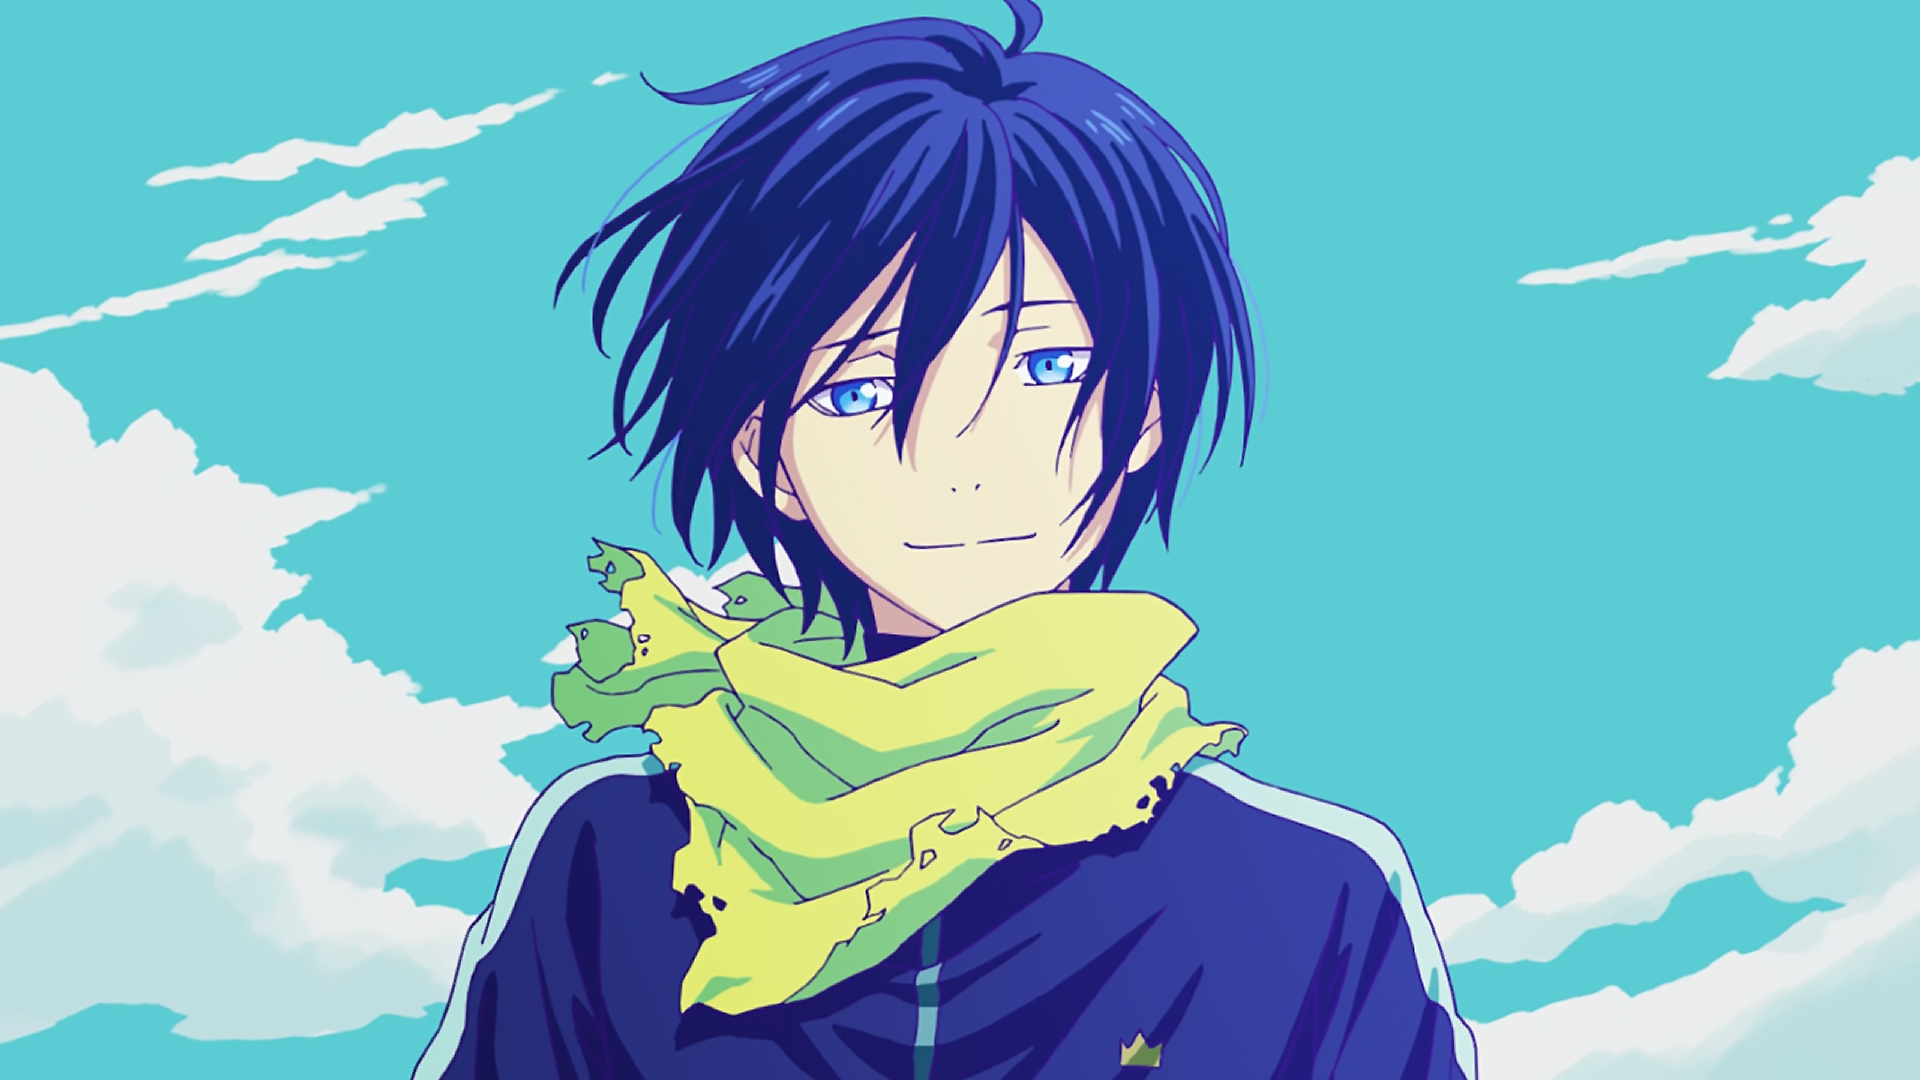 2. Yato from Noragami - wide 11